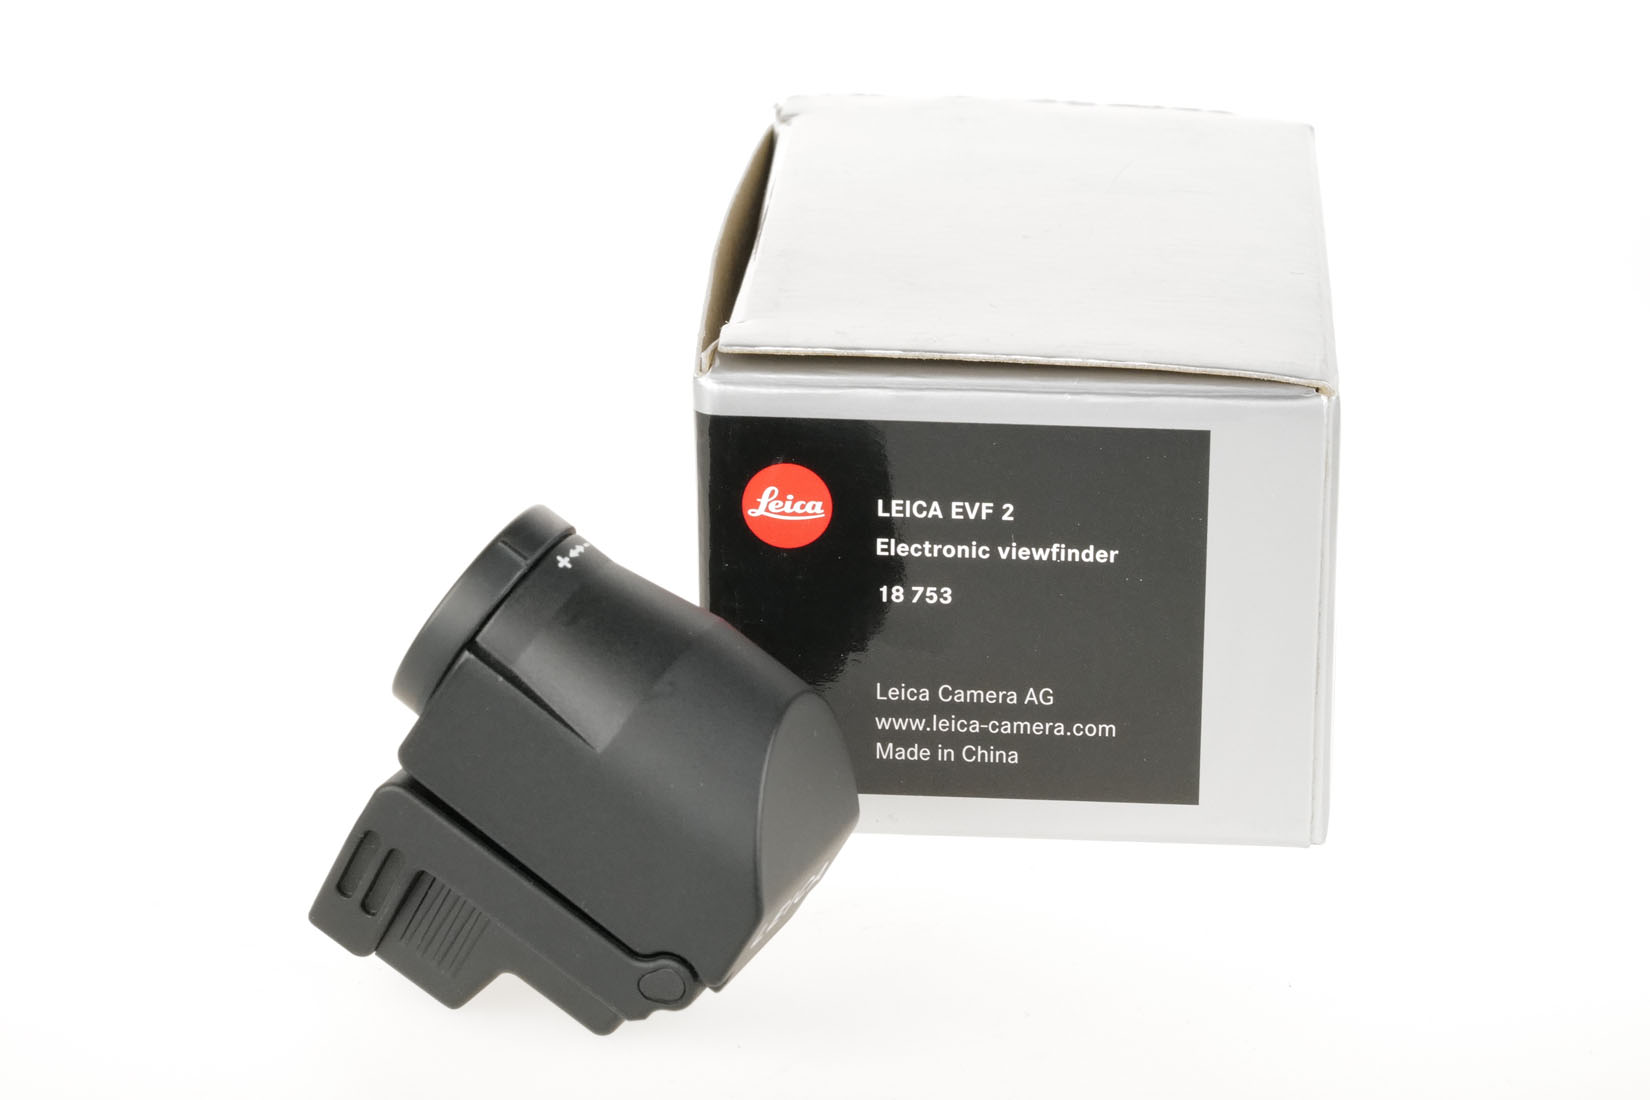 Leica EVF 2 Electronic viewfinder 18753